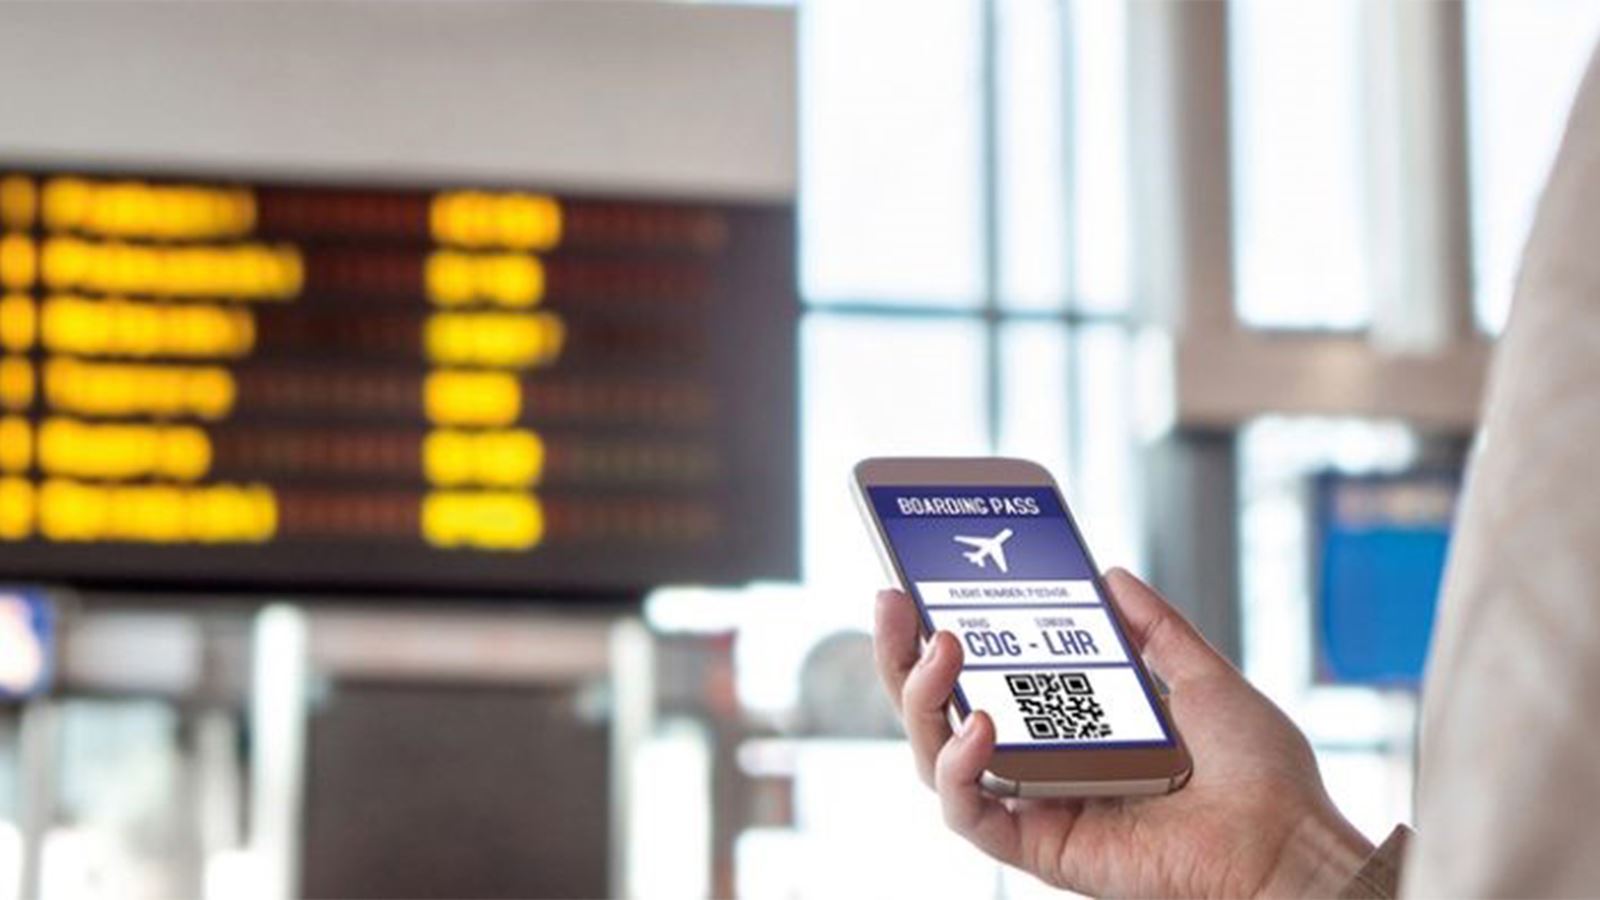 Collins Aerospace’s Tony Chapman discusses how airports are leaders in the use of new technology, which will make touchless travel possible and hasten aviation’s recovery from COVID-19.